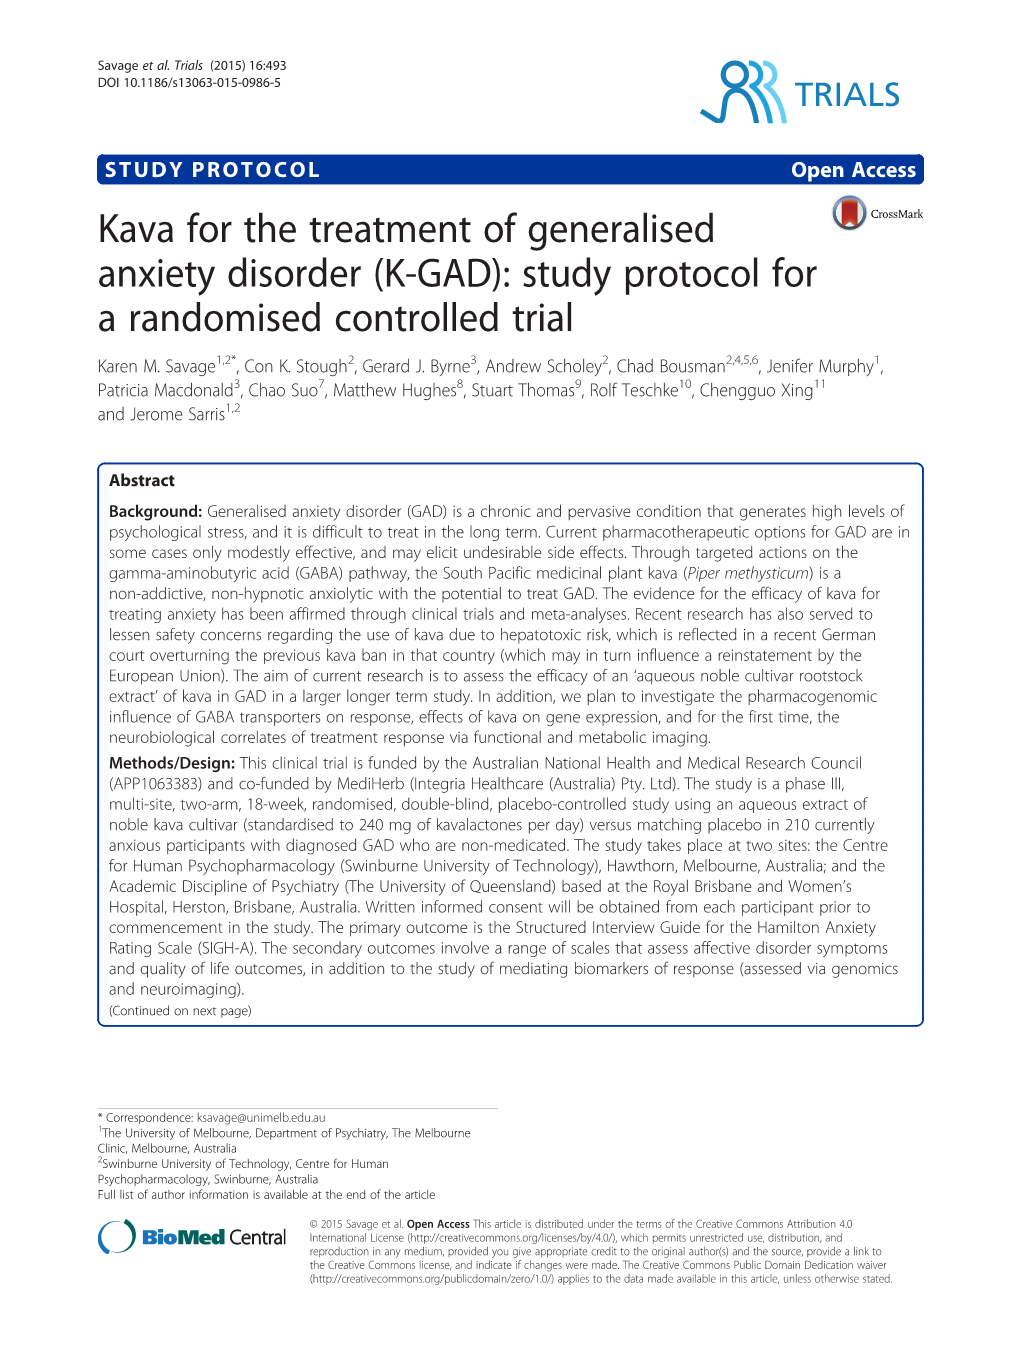 Kava for the Treatment of Generalised Anxiety Disorder (K-GAD): Study Protocol for a Randomised Controlled Trial Karen M